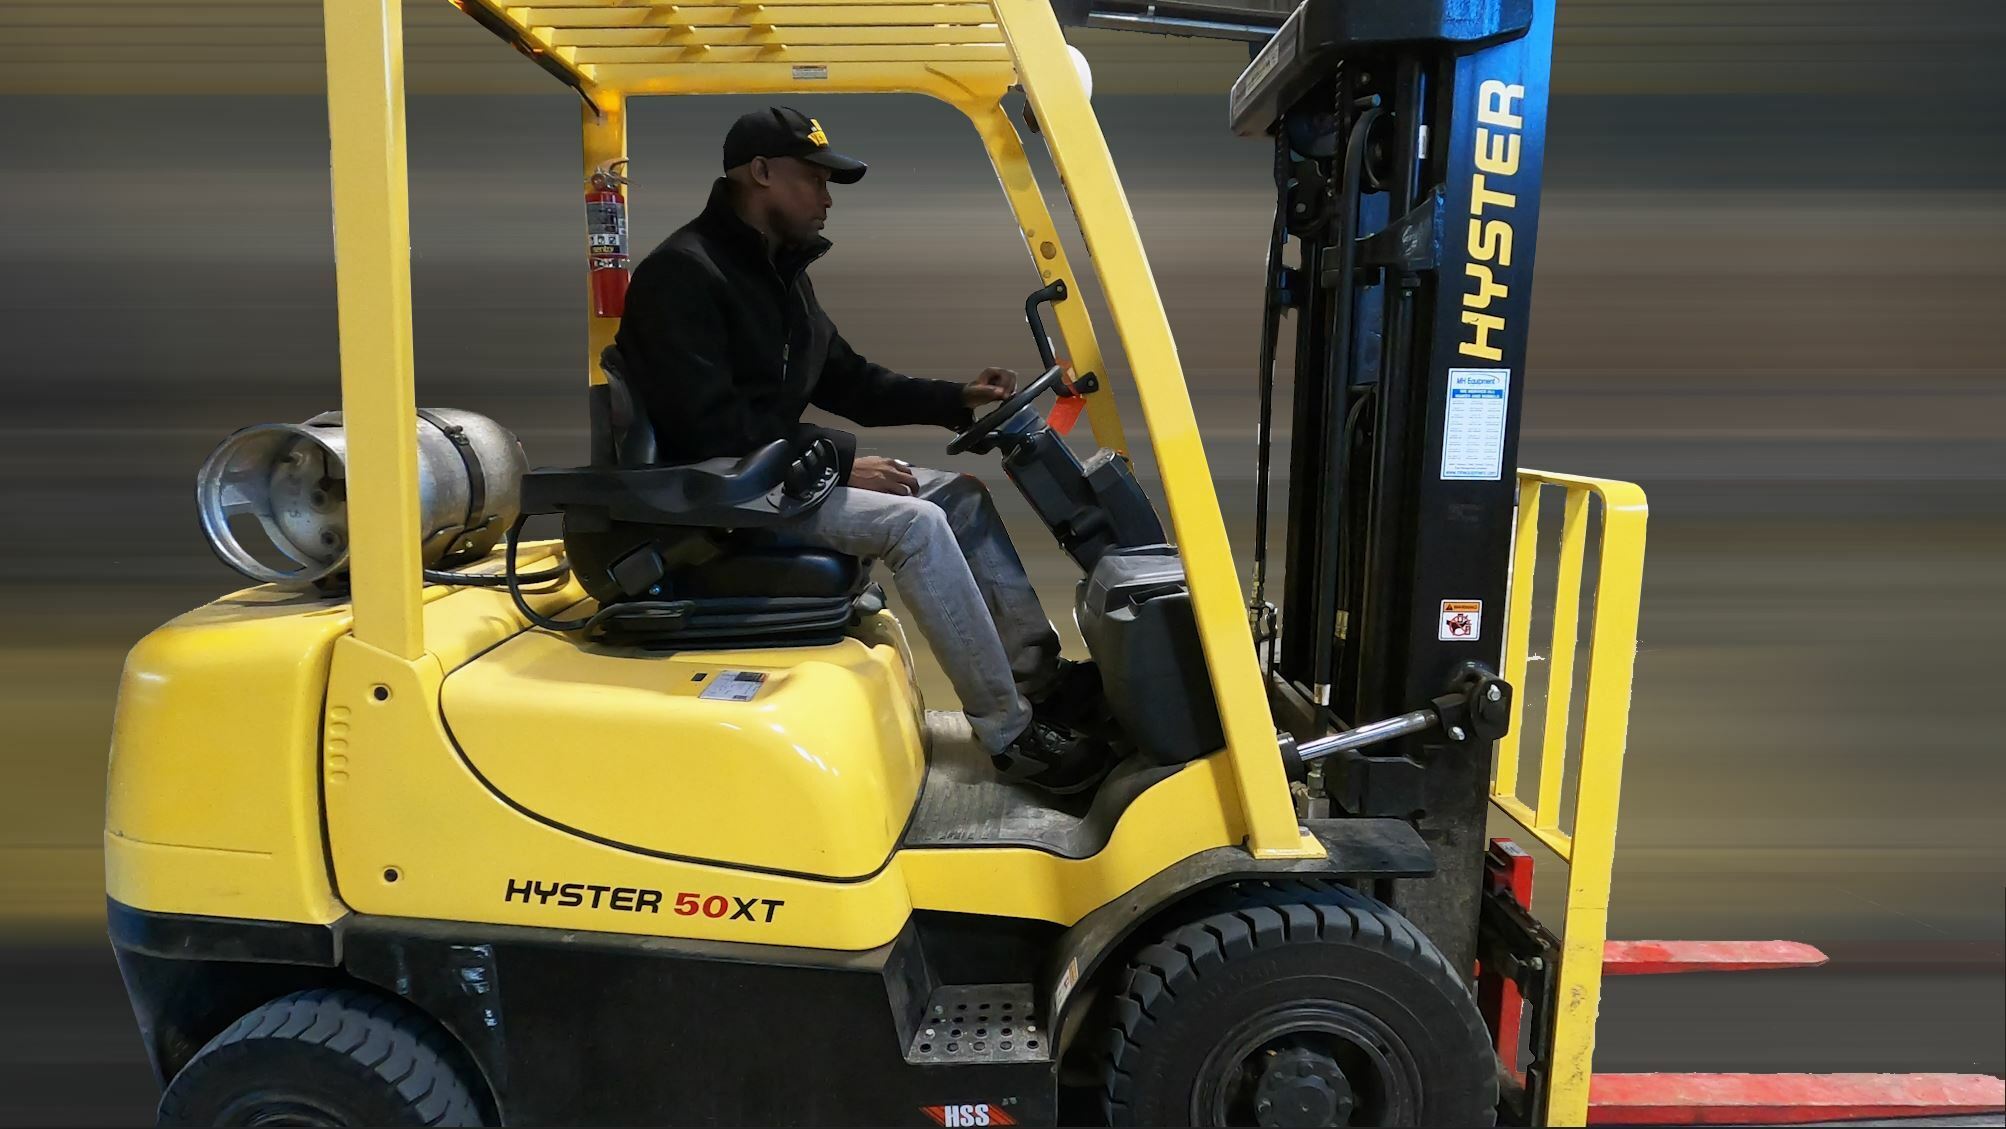 A Black man is operating a fork lift vehicle.